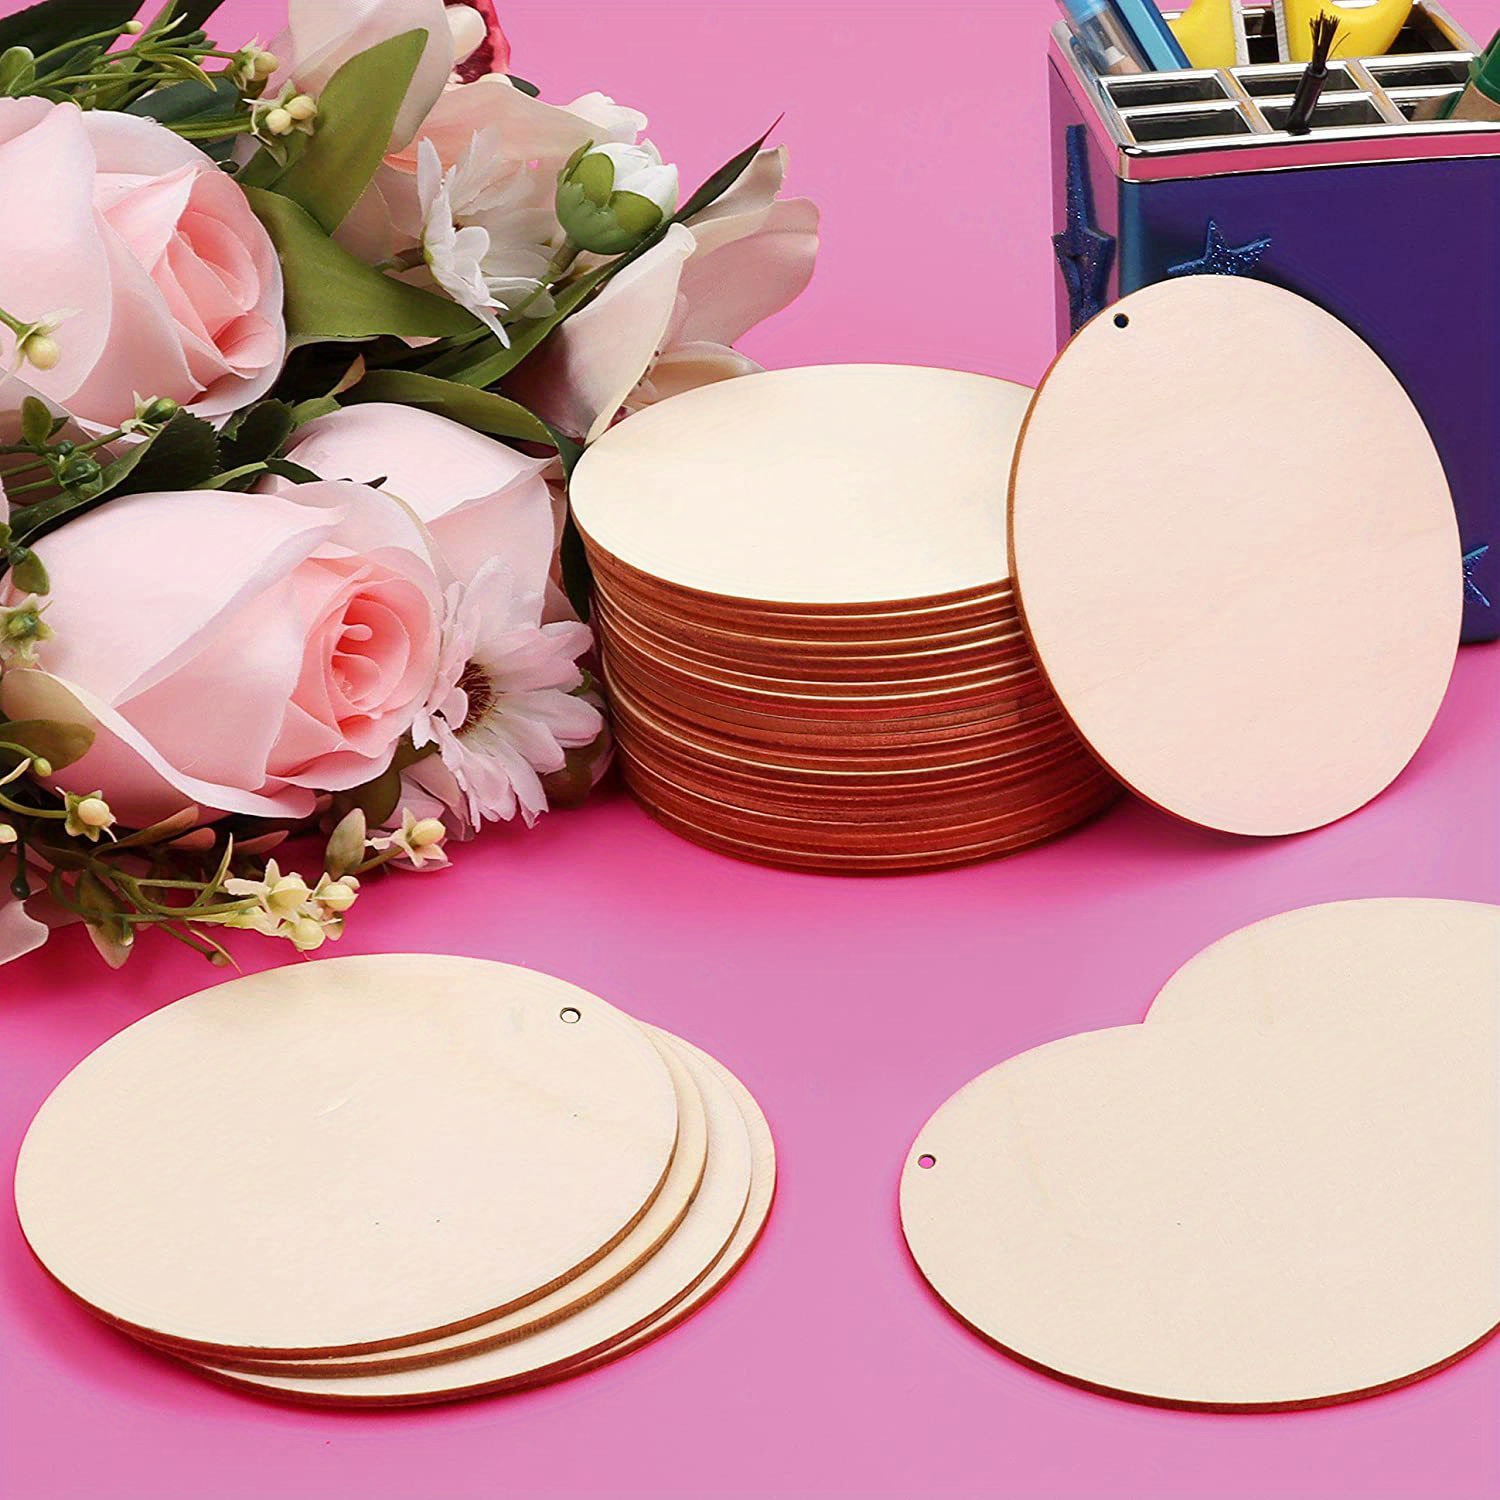 Round Wooden Hoops With Holes Round Wooden Discs For Crafts - Temu